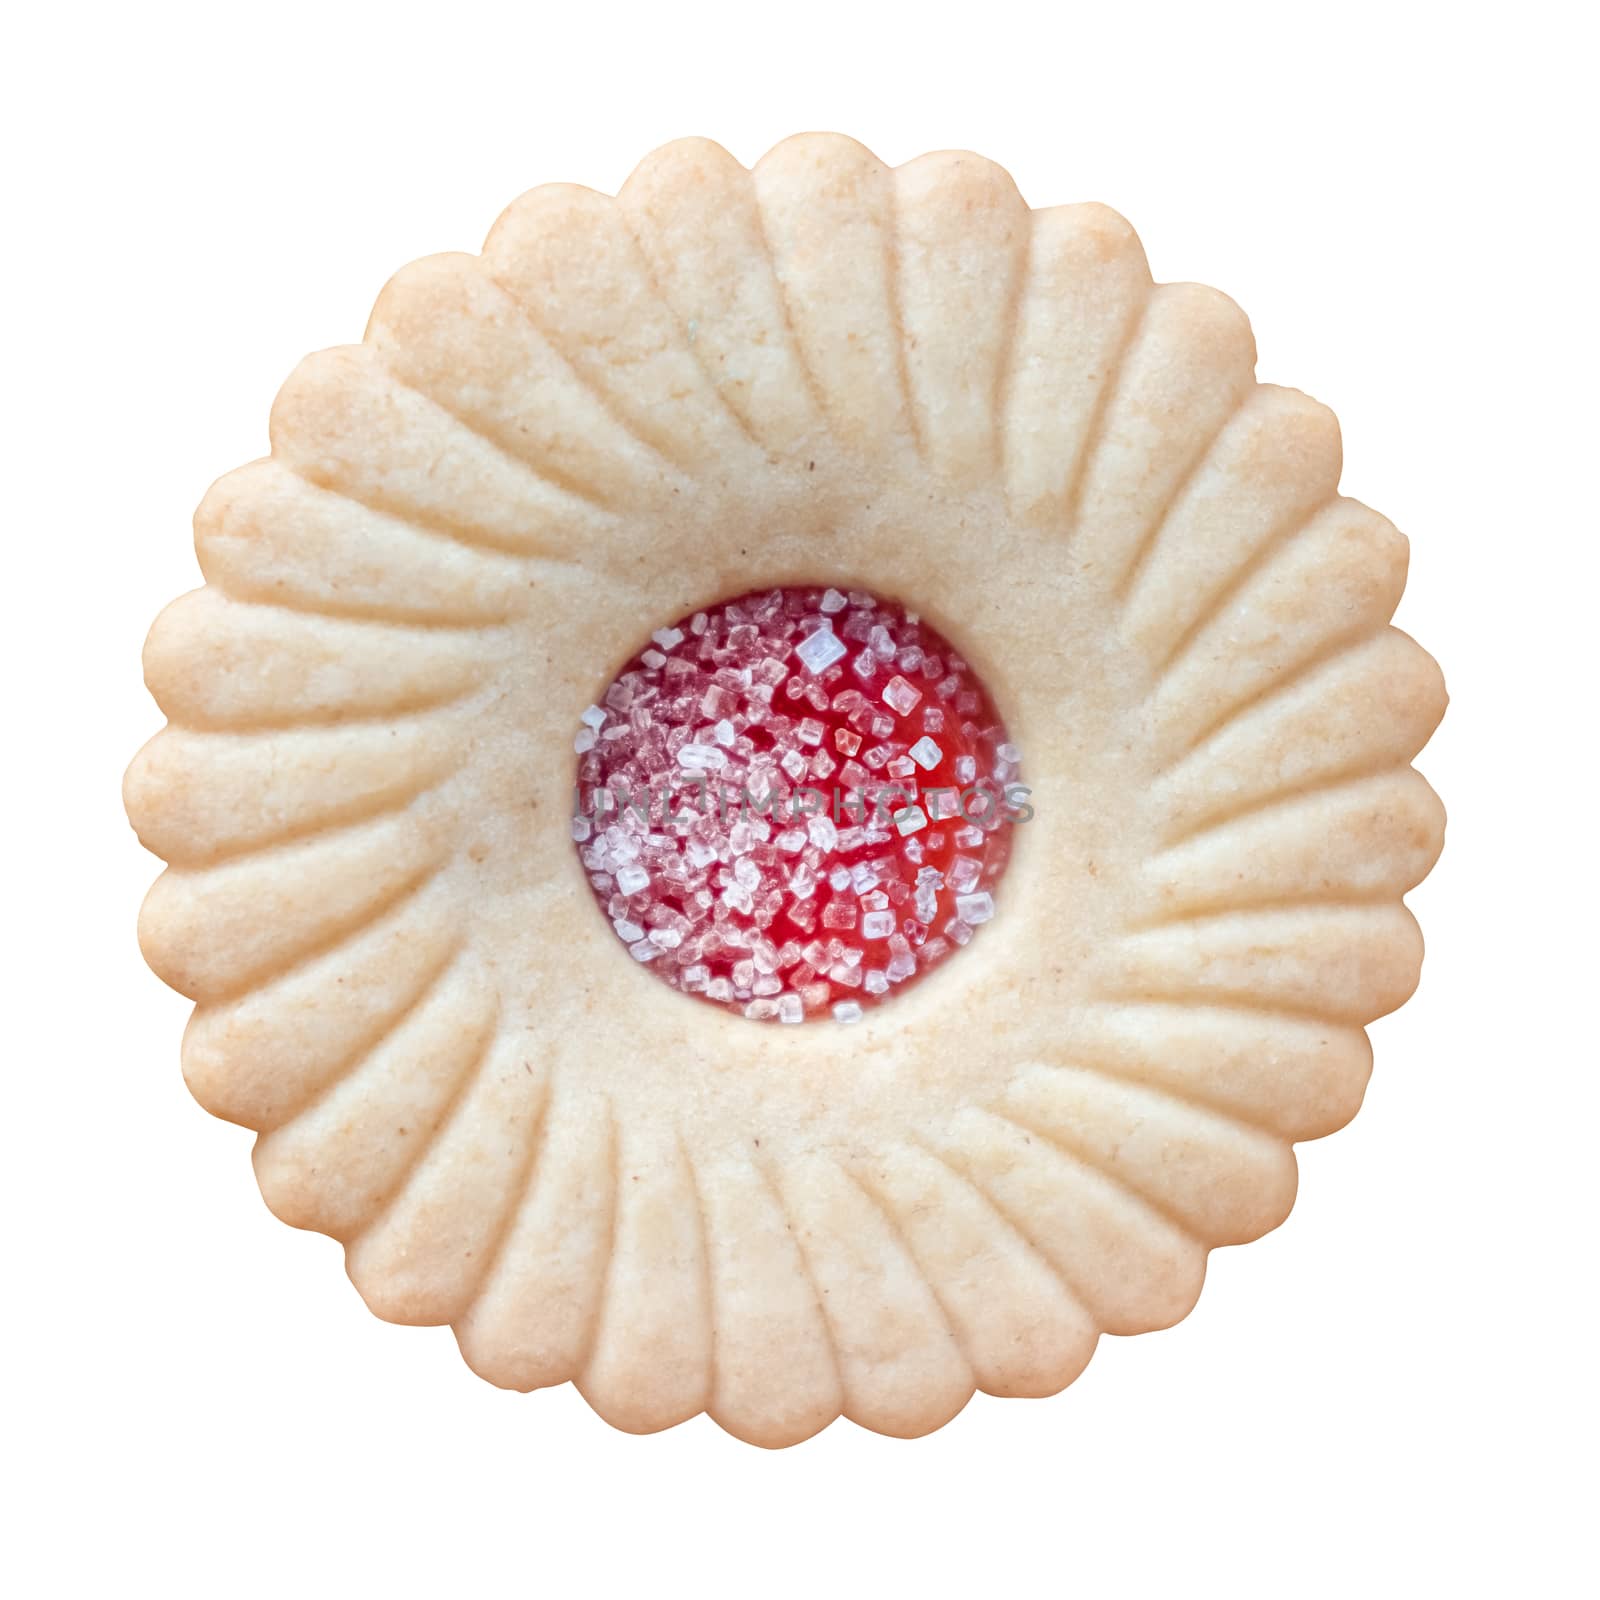 A Vintage British Style Biscuit (Cookie) With Strawberry Jam In The Middle